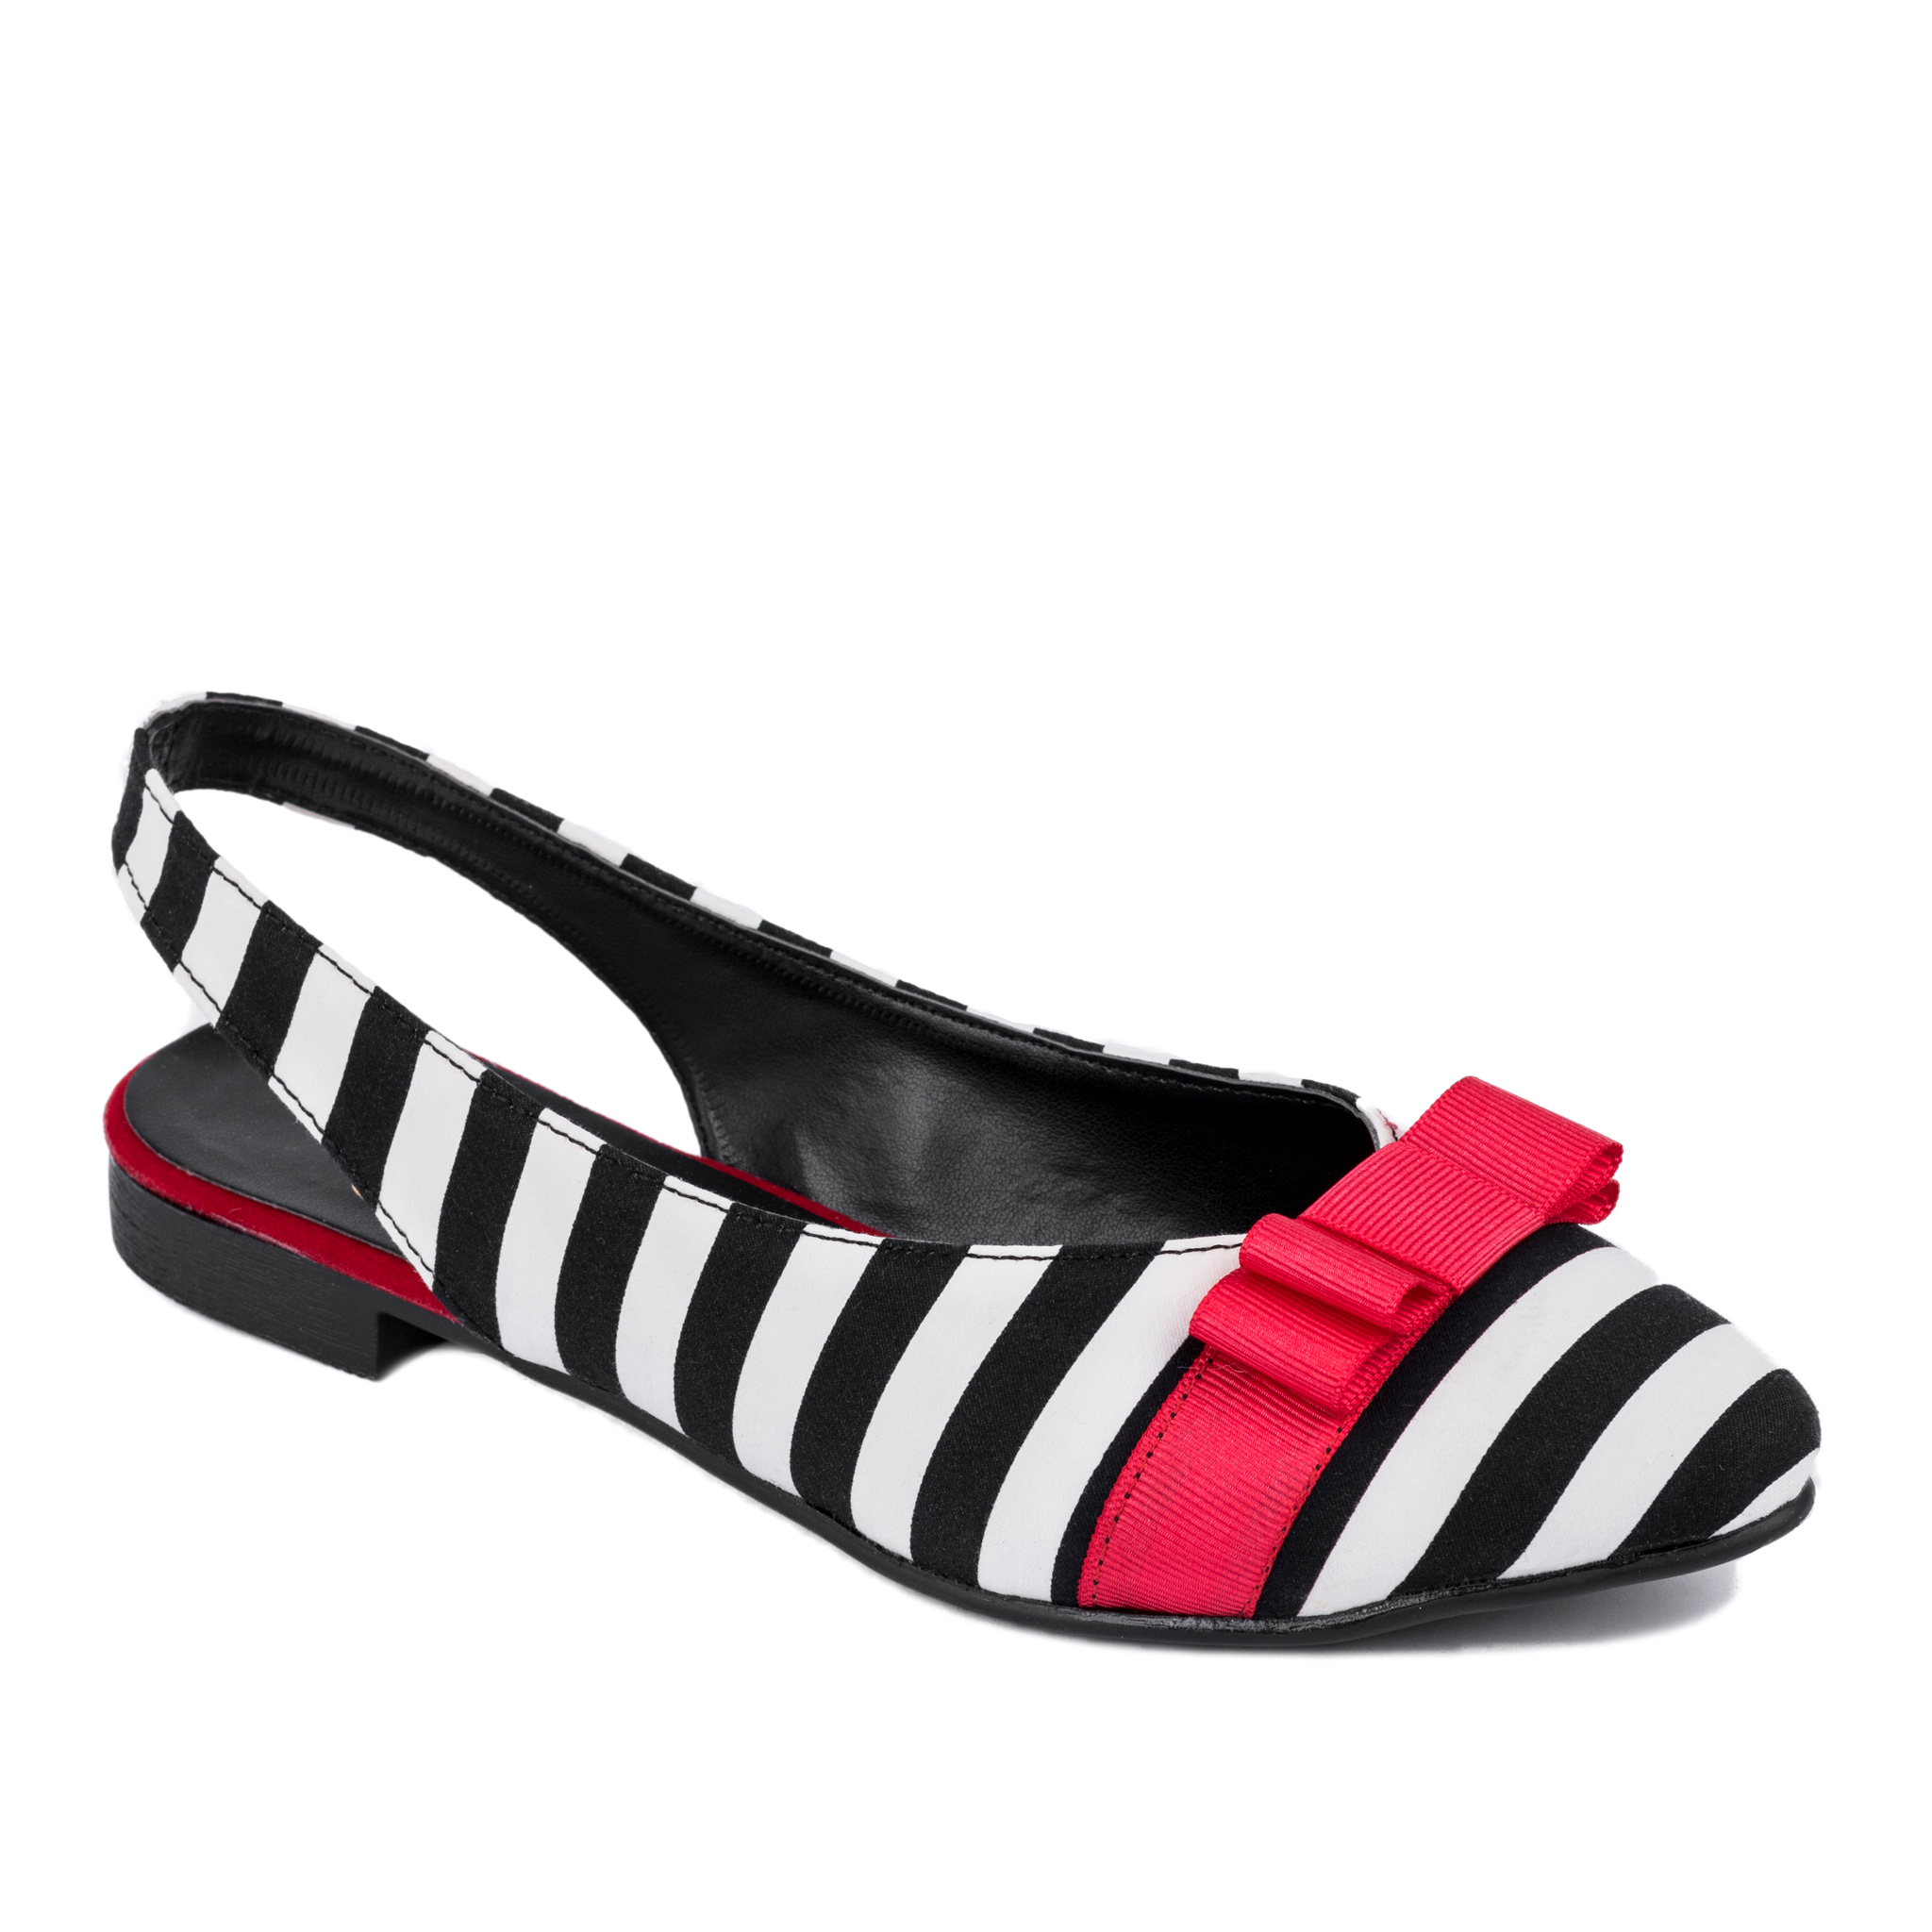 STRIPED FLATS WITH BOW - BLACK/WHITE